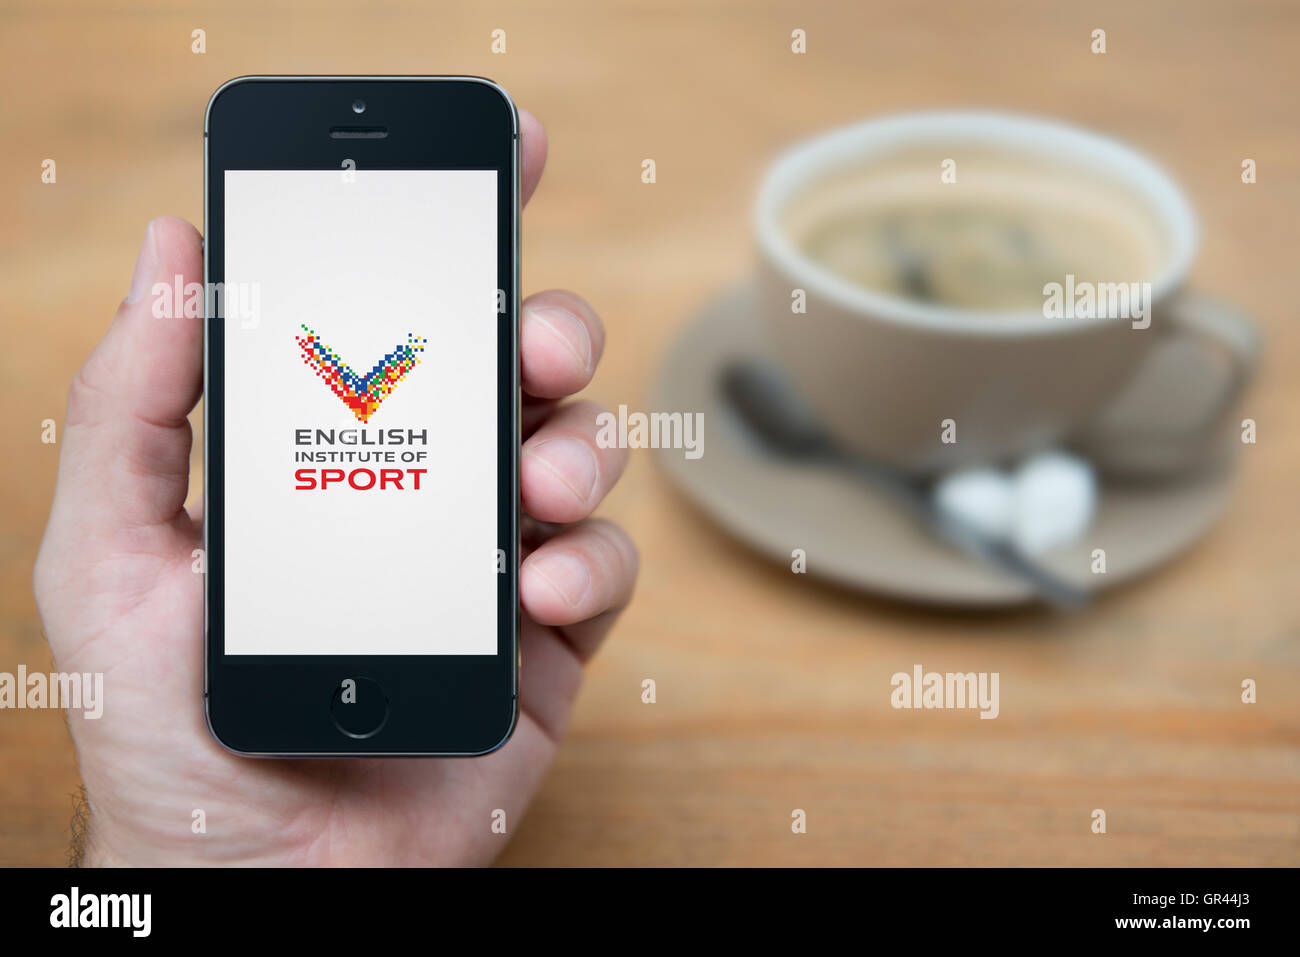 A man looks at his iPhone which displays the English Institute of Sport logo (Editorial use only). Stock Photo